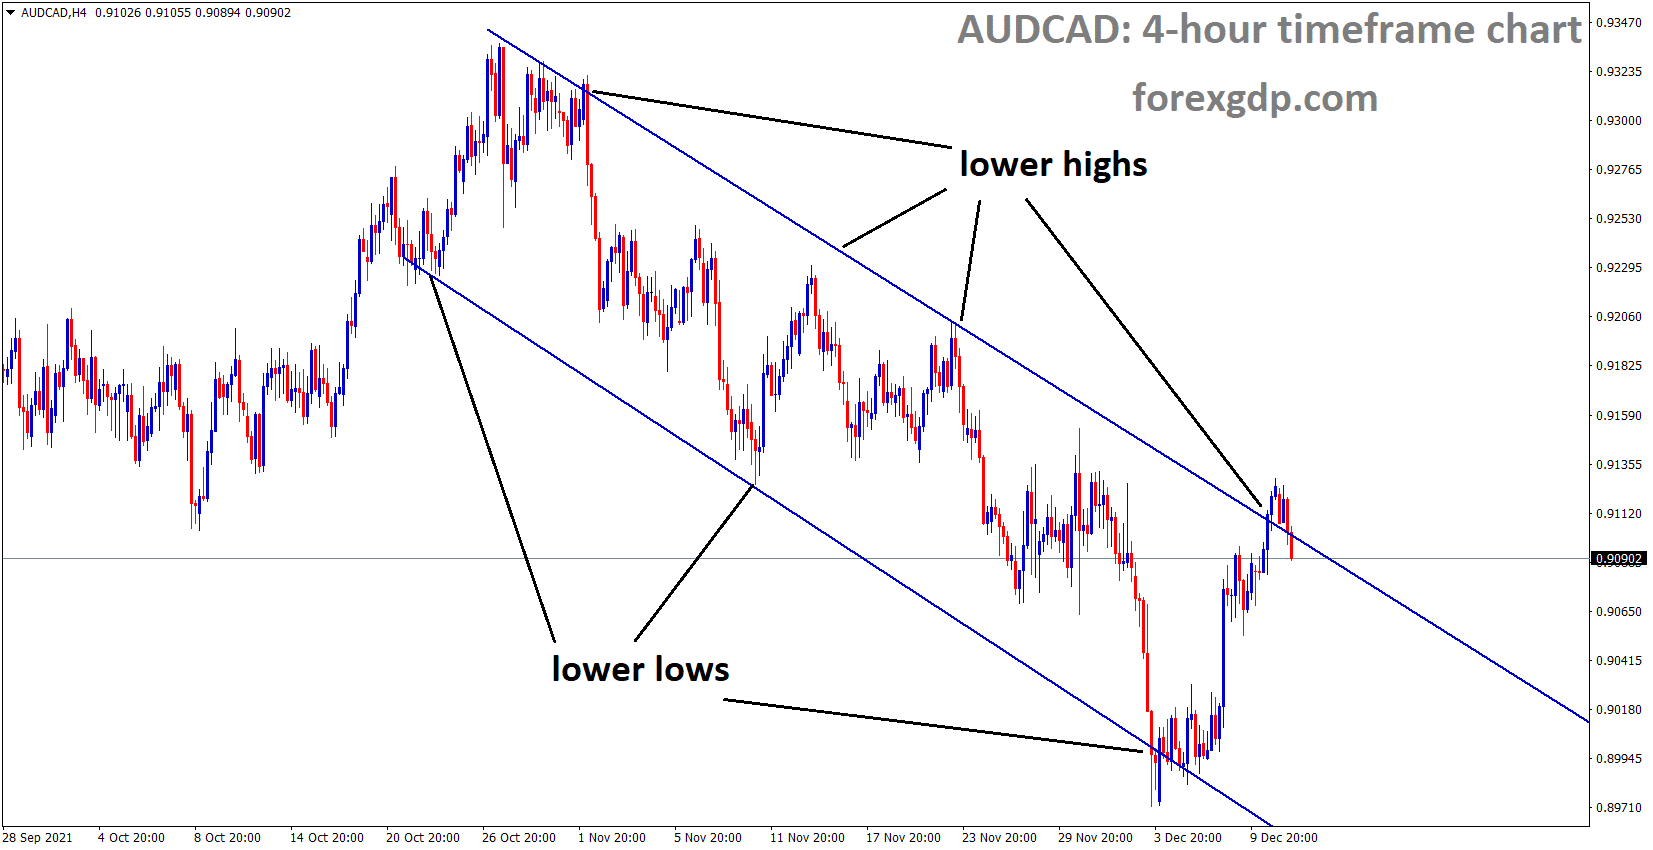 AUDCAD is moving in the Descending channel and the market fell from the lower high area of the channel